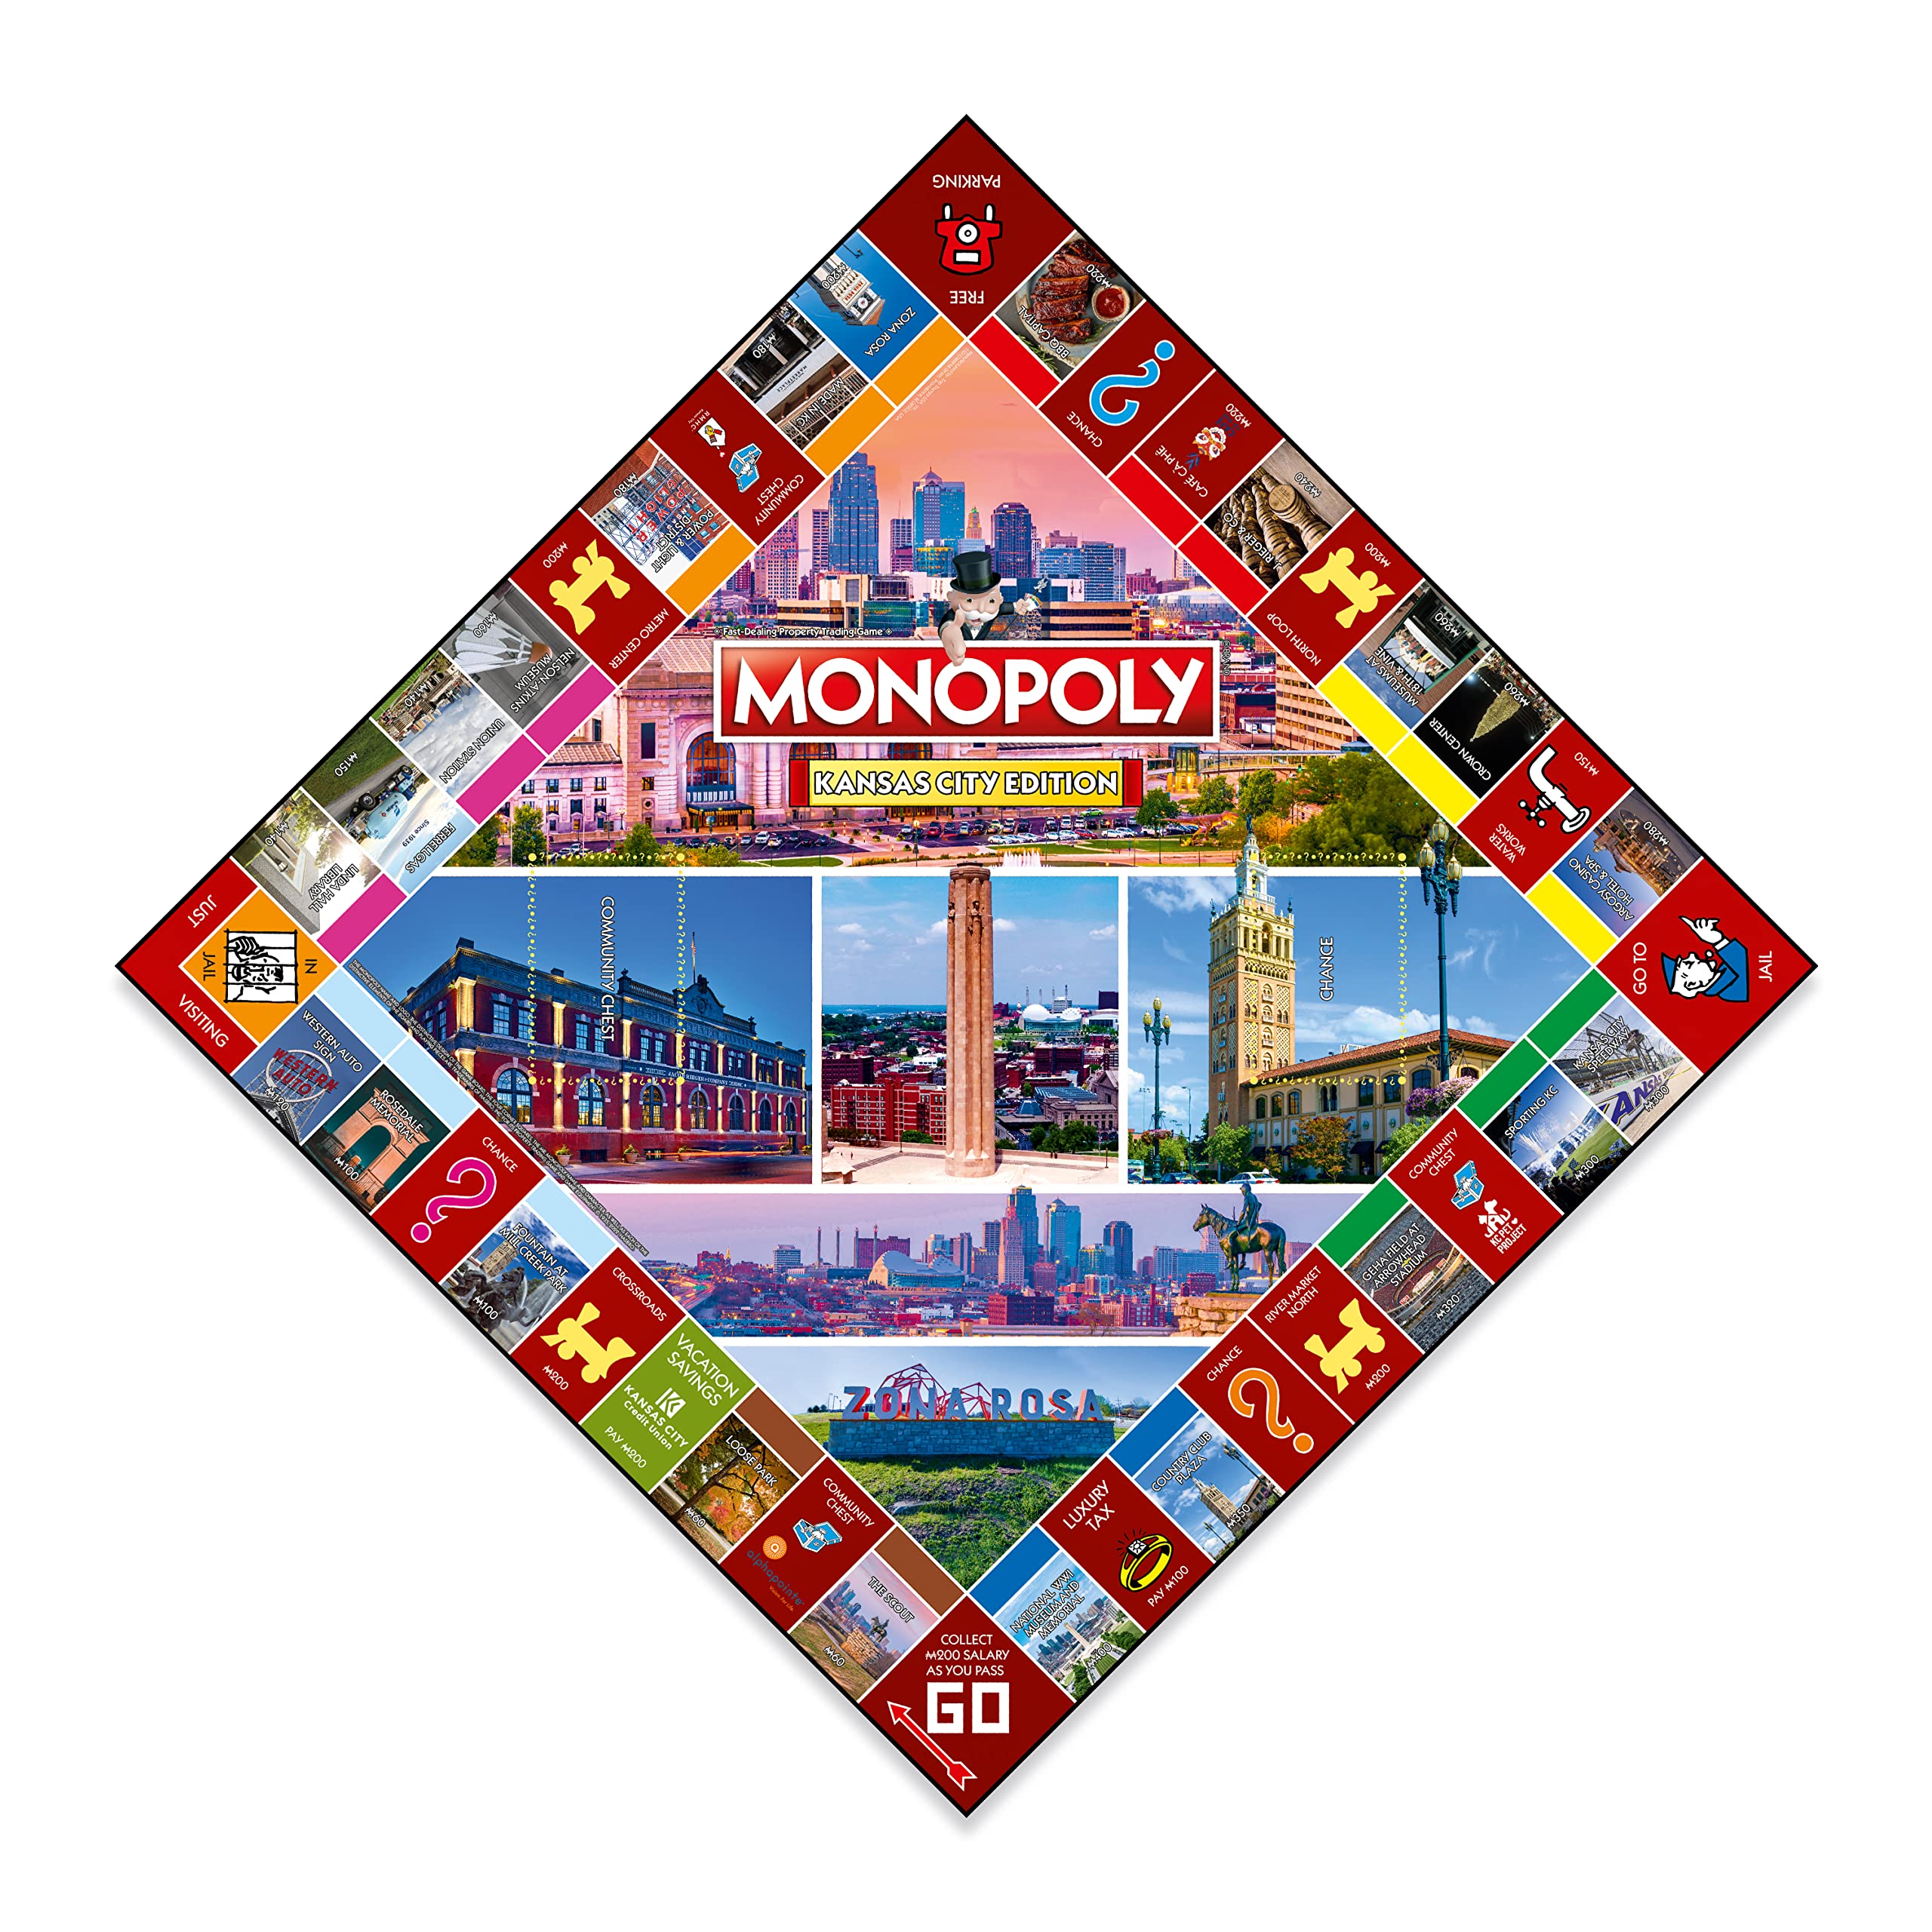 Monopoly Kansas City Edition, Family Board Game for 2-6 Players Ages 8 and Up